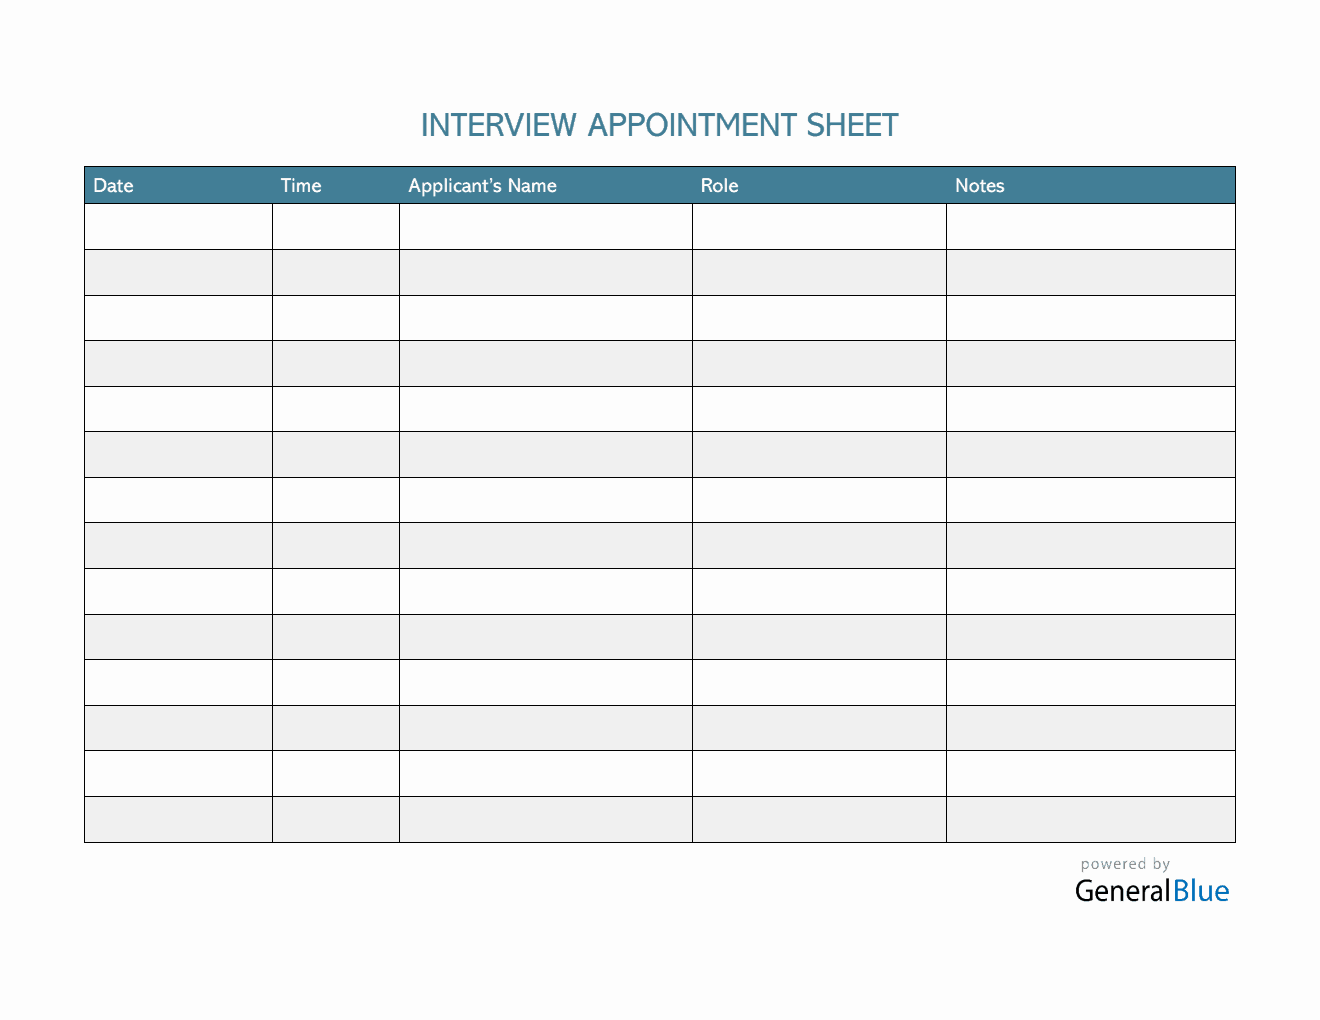 Interview Appointment Sheet Template in Word (Striped)